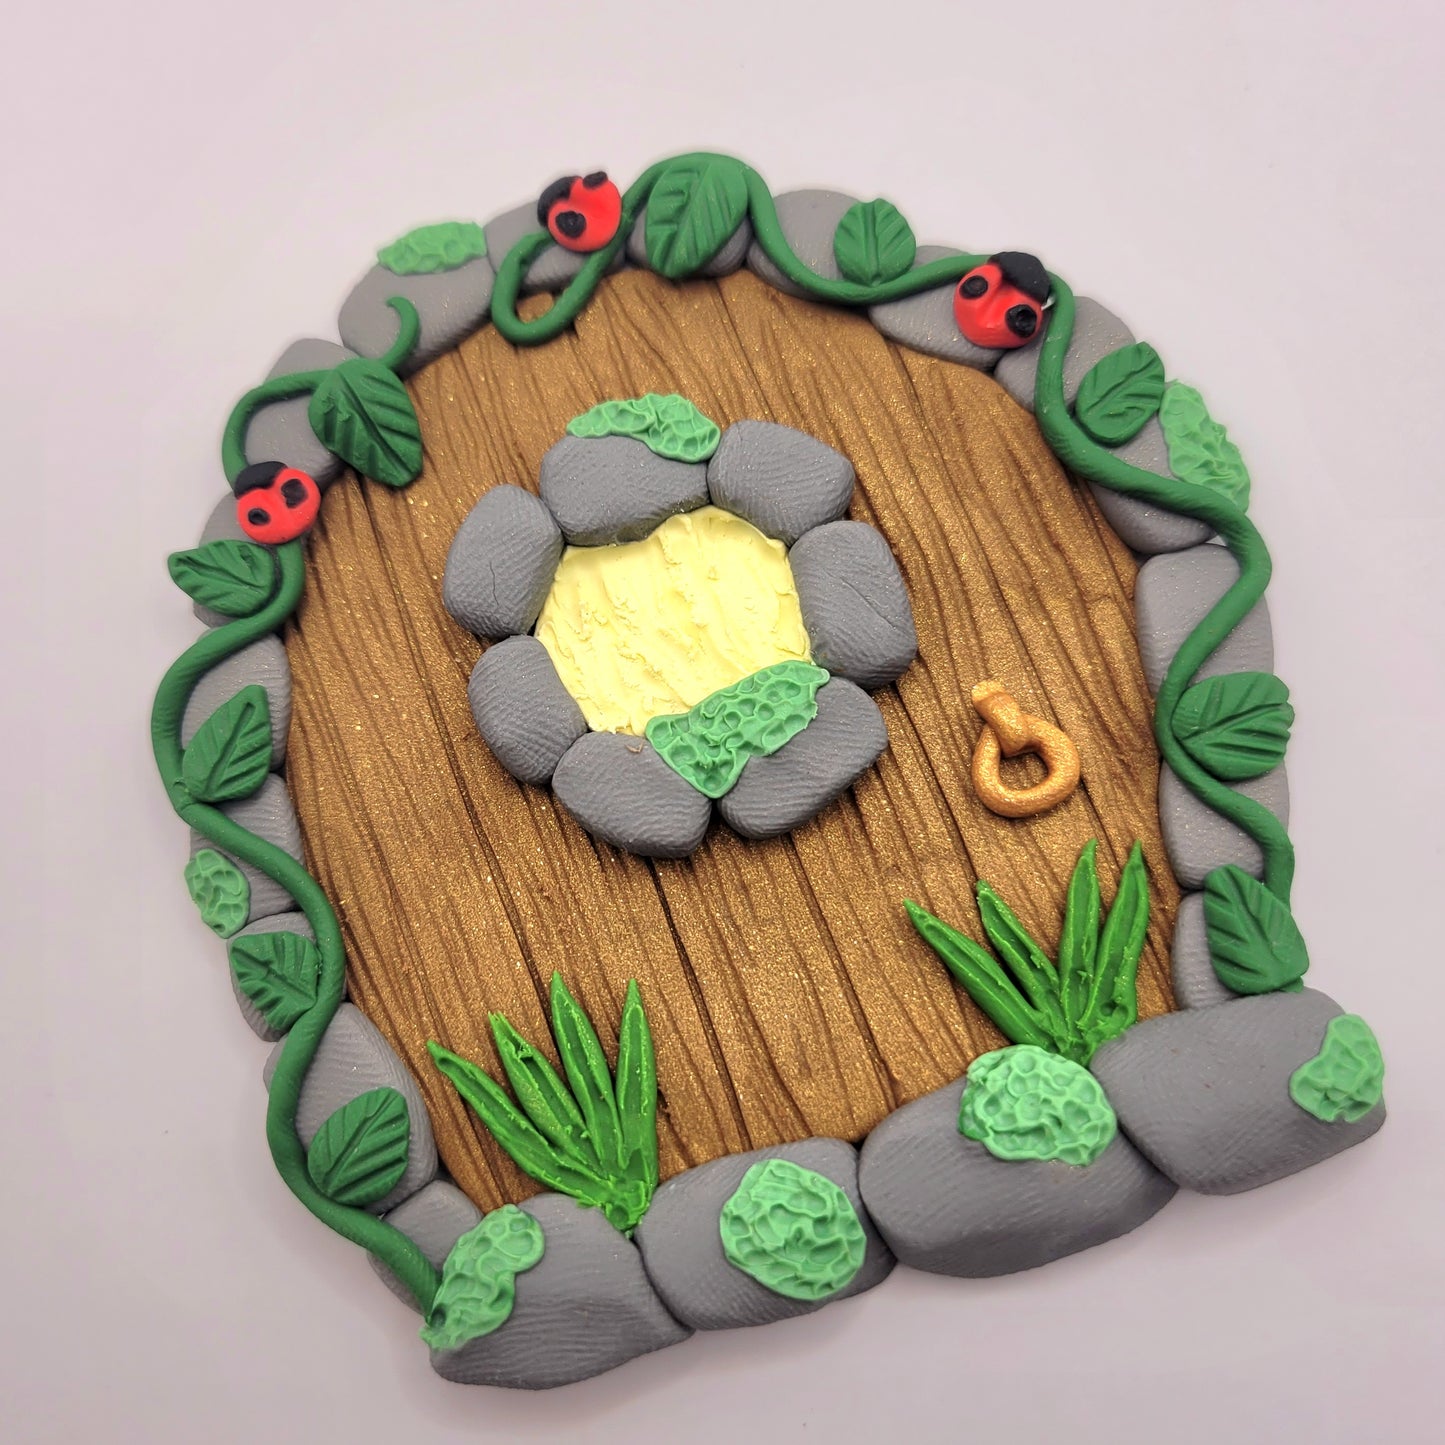 The ladybug fairy door rests at an angle on a white background. The mini ladybug door is brown wood patterned with grey cobblestone finish, a window and a door knob. It is detailed with green grass, moss, vines and, of course, ladybugs!